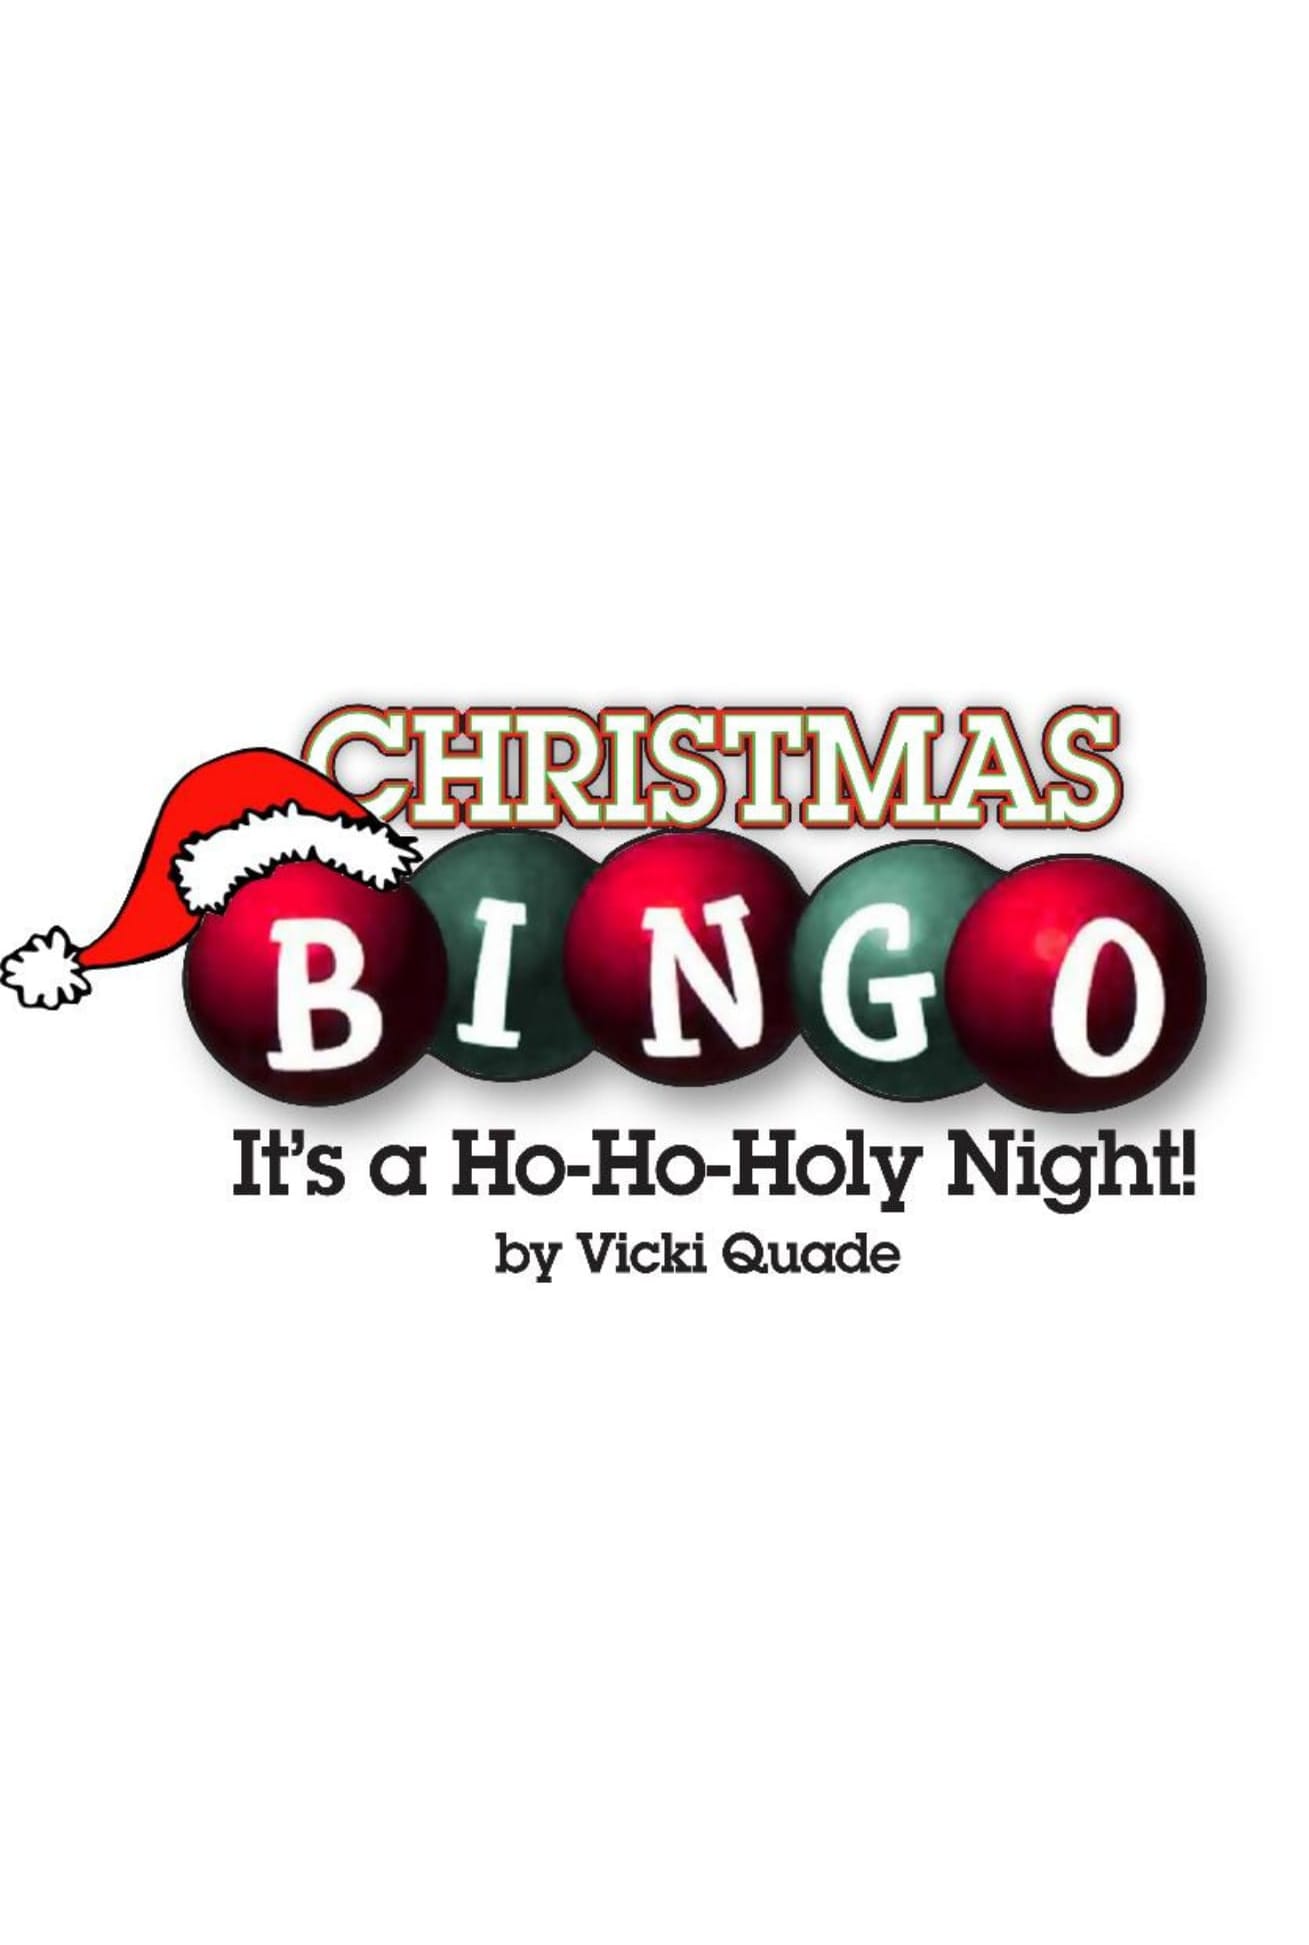 Christmas Bingo: It’s a Ho-Ho-Holy Night in Chicago